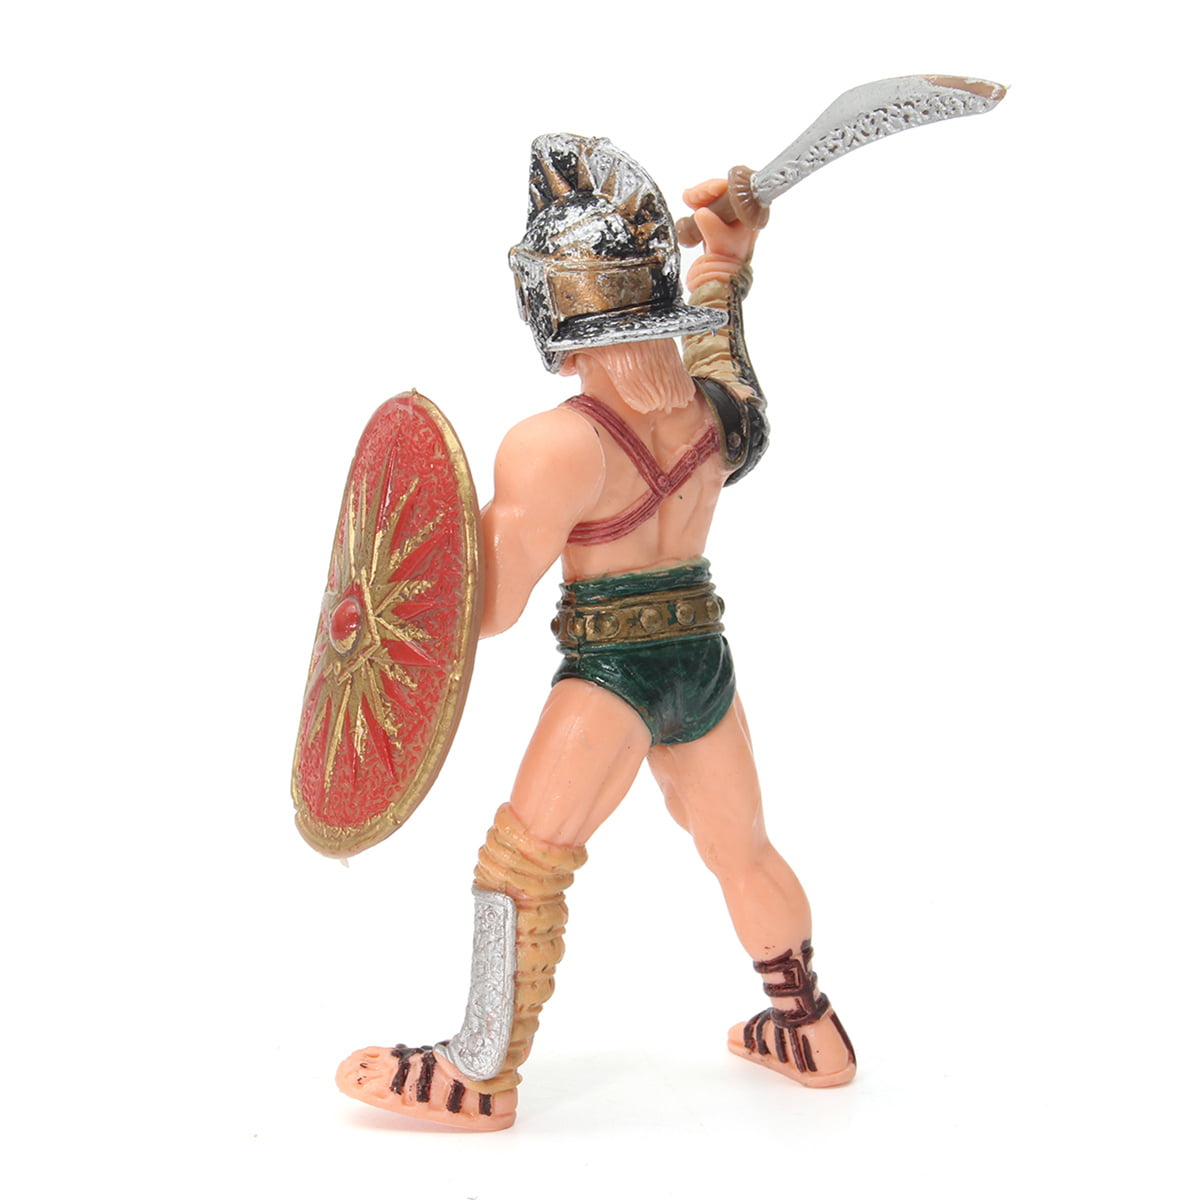 6Pcs/Set Gladiator Warrior Fighter Roman Soldier Action Figures w/Weapons Gift 